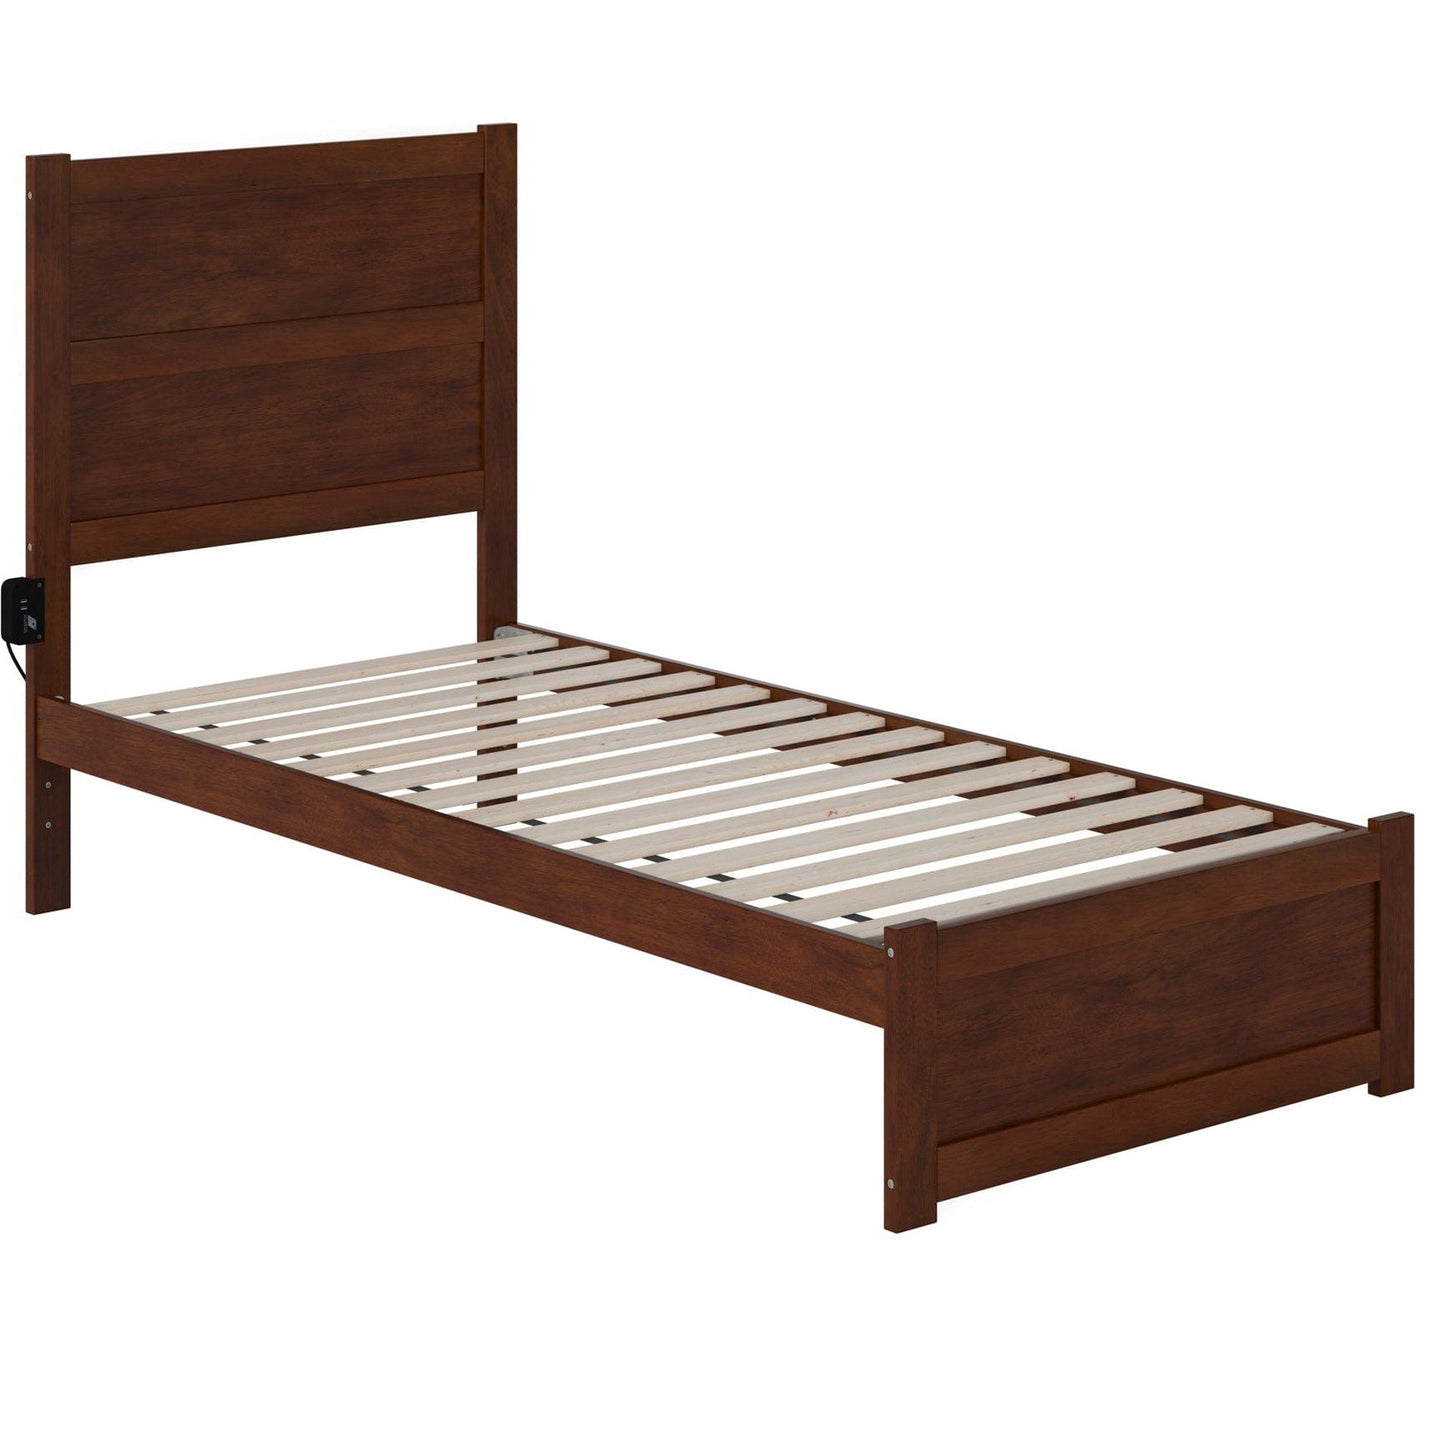 AFI Furnishings NoHo Twin Extra Long Bed with Footboard in Walnut AG9160013